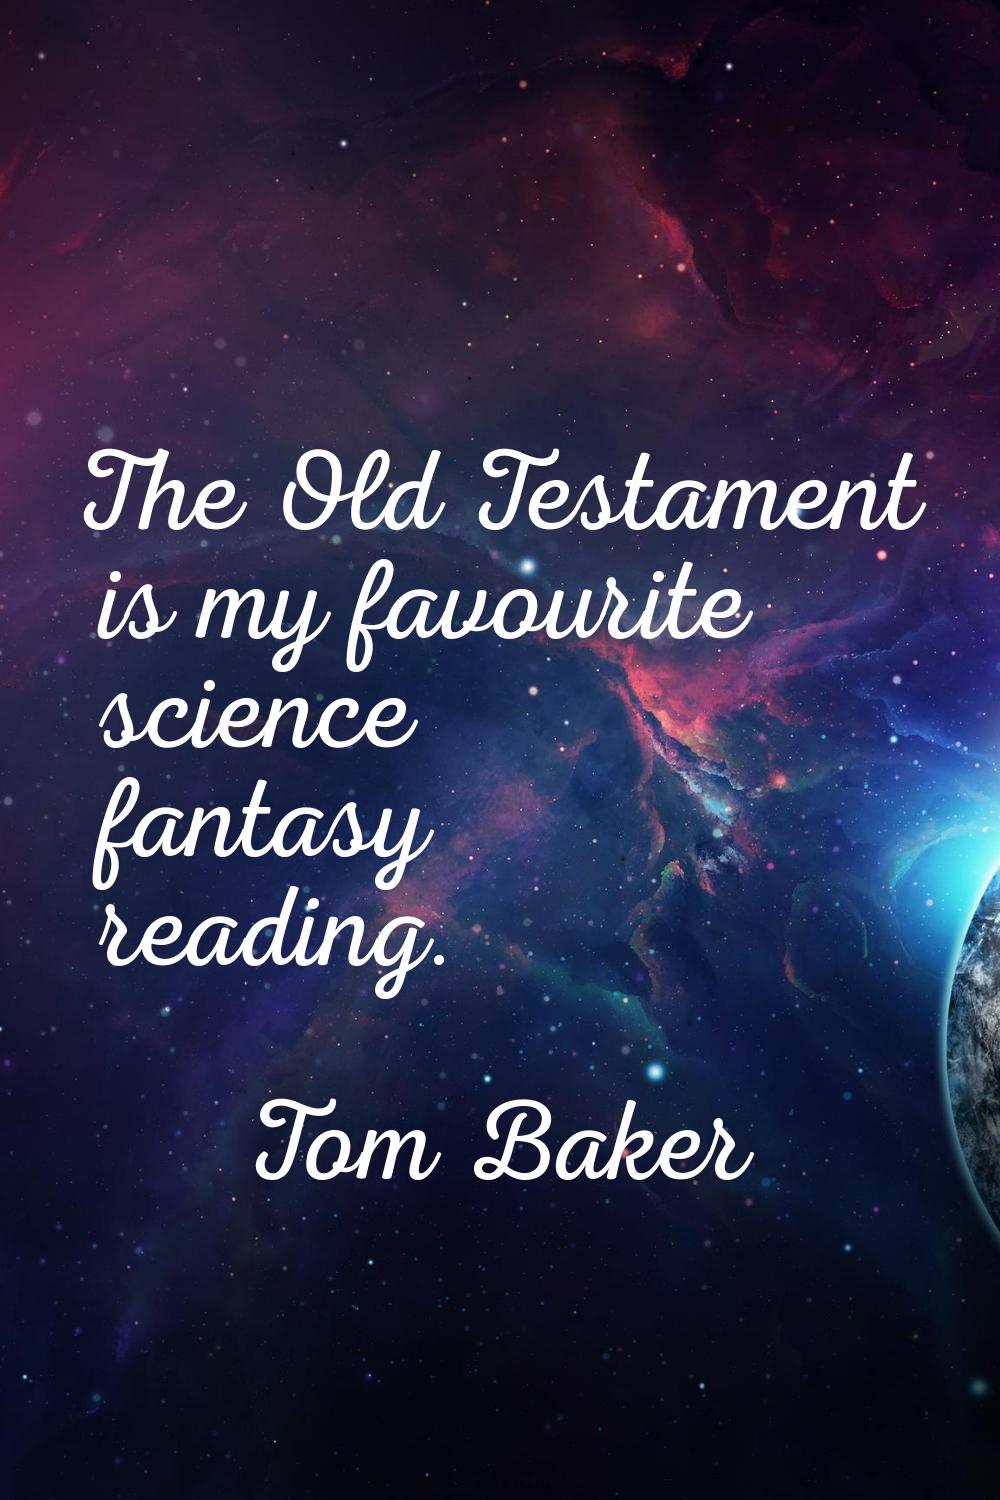 The Old Testament is my favourite science fantasy reading.